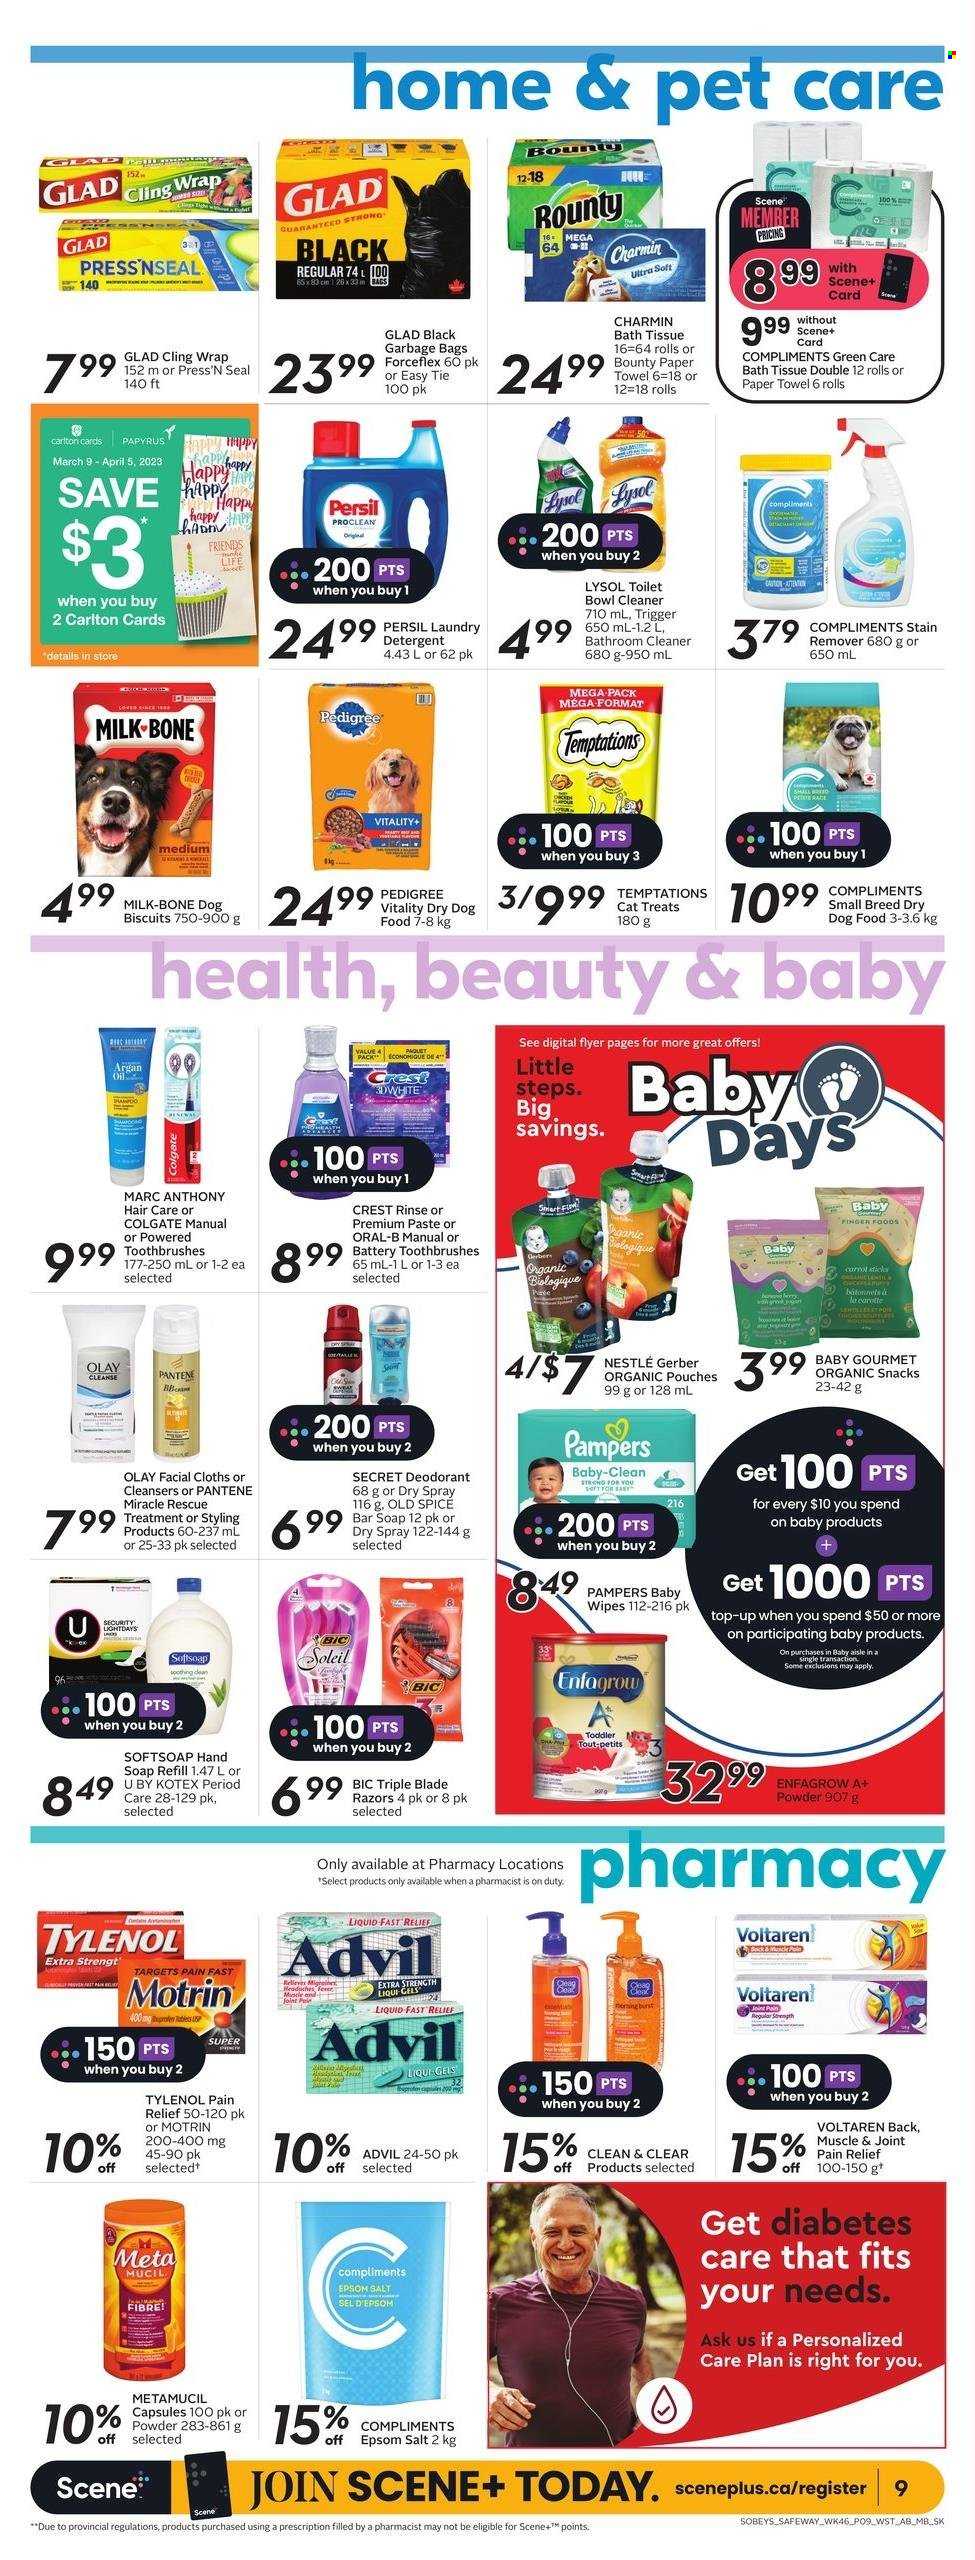 thumbnail - Sobeys Flyer - March 16, 2023 - March 22, 2023 - Sales products - milk, snack, Bounty, Gerber, spice, wipes, Pampers, baby wipes, bath tissue, paper towels, Charmin, cleaner, stain remover, Lysol, Persil, laundry detergent, Softsoap, soap bar, soap, Crest, Kotex, Olay, Clean & Clear, Pantene, anti-perspirant, BIC, animal food, dry dog food, animal treats, dog food, dog biscuits, Pedigree, pain relief, Tylenol, argan oil, Advil Rapid, Metamucil, Motrin, detergent, Colgate, Nestlé, Old Spice, Oral-B, deodorant. Page 15.